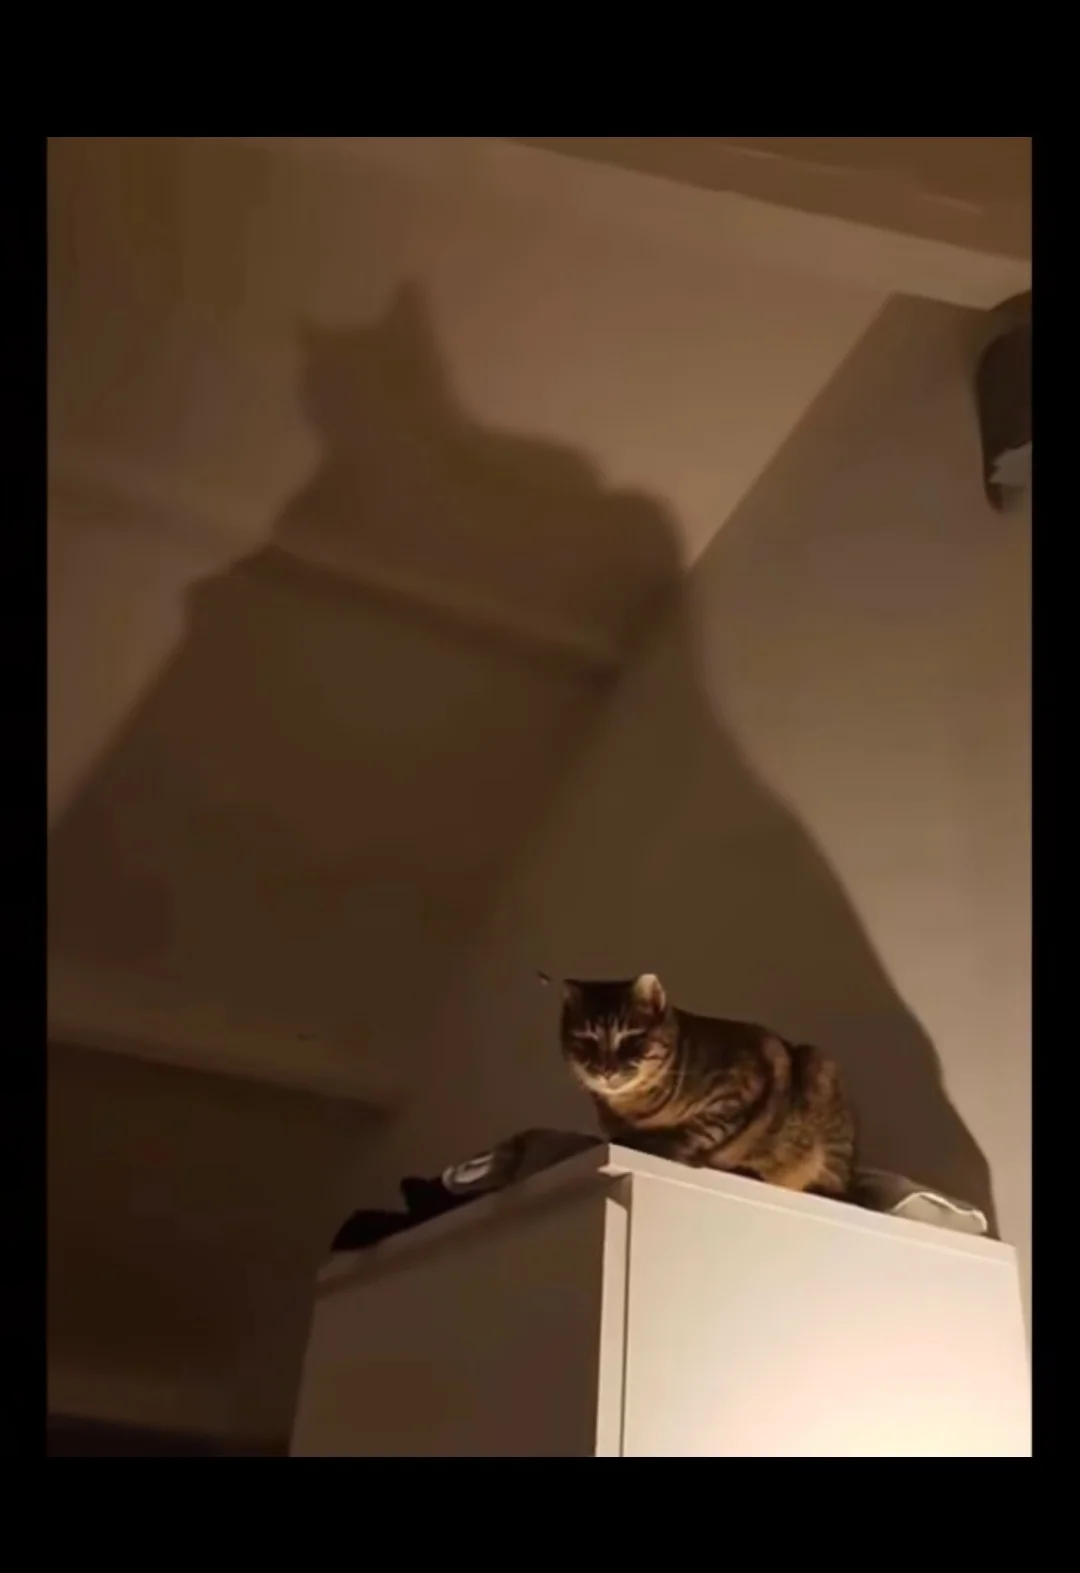 "The Batman": a cat who has been to Gotham